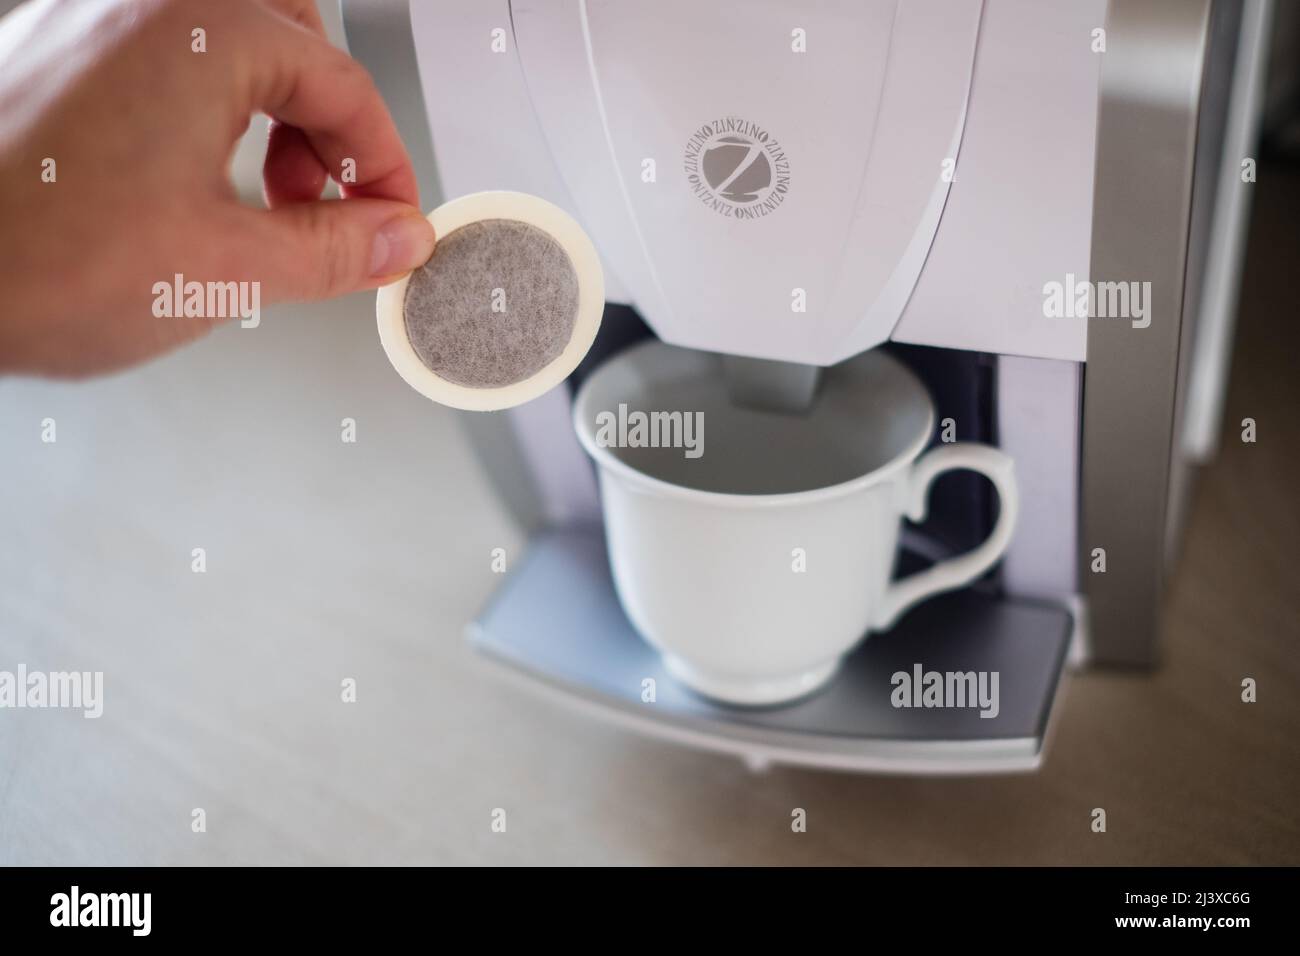 Zinzino program coffee machine. Pyramid type scheme that uses person to person direct sale and network marketing to sell health products. Stock Photo